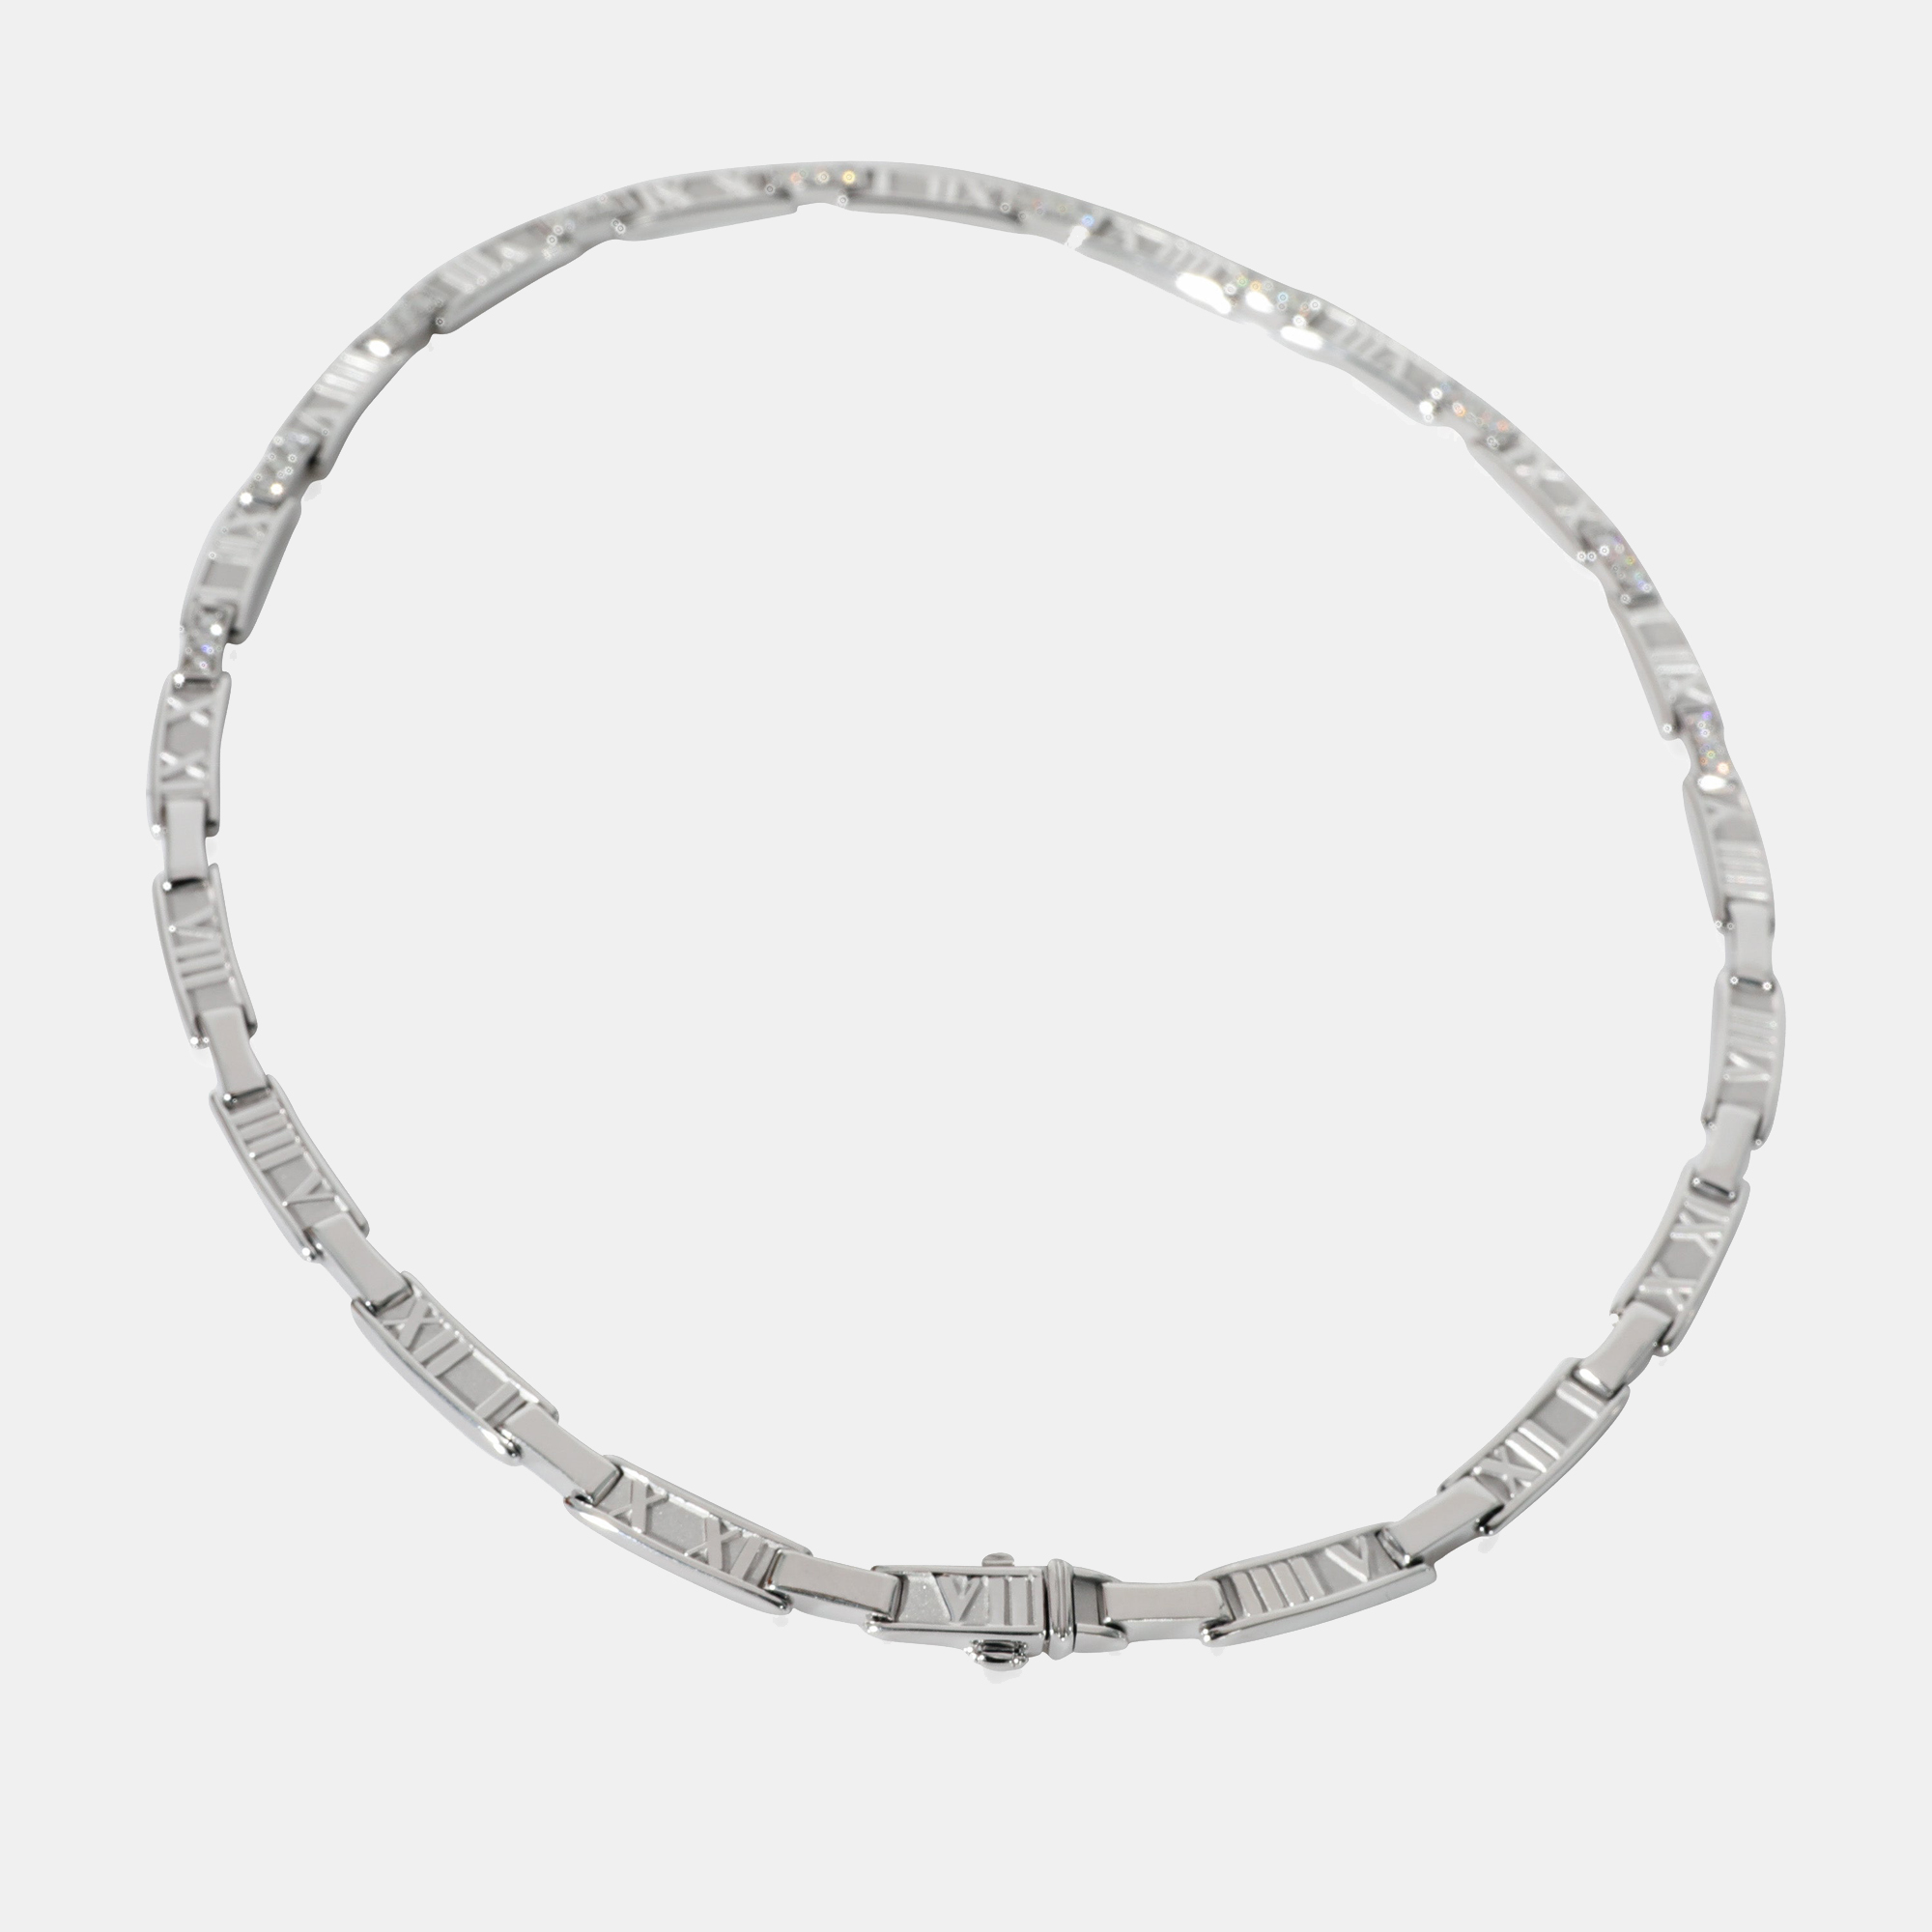 Pre-owned Tiffany & Co Atlas Diamond Collar Necklace In 18k White Gold 1.5 Ctw